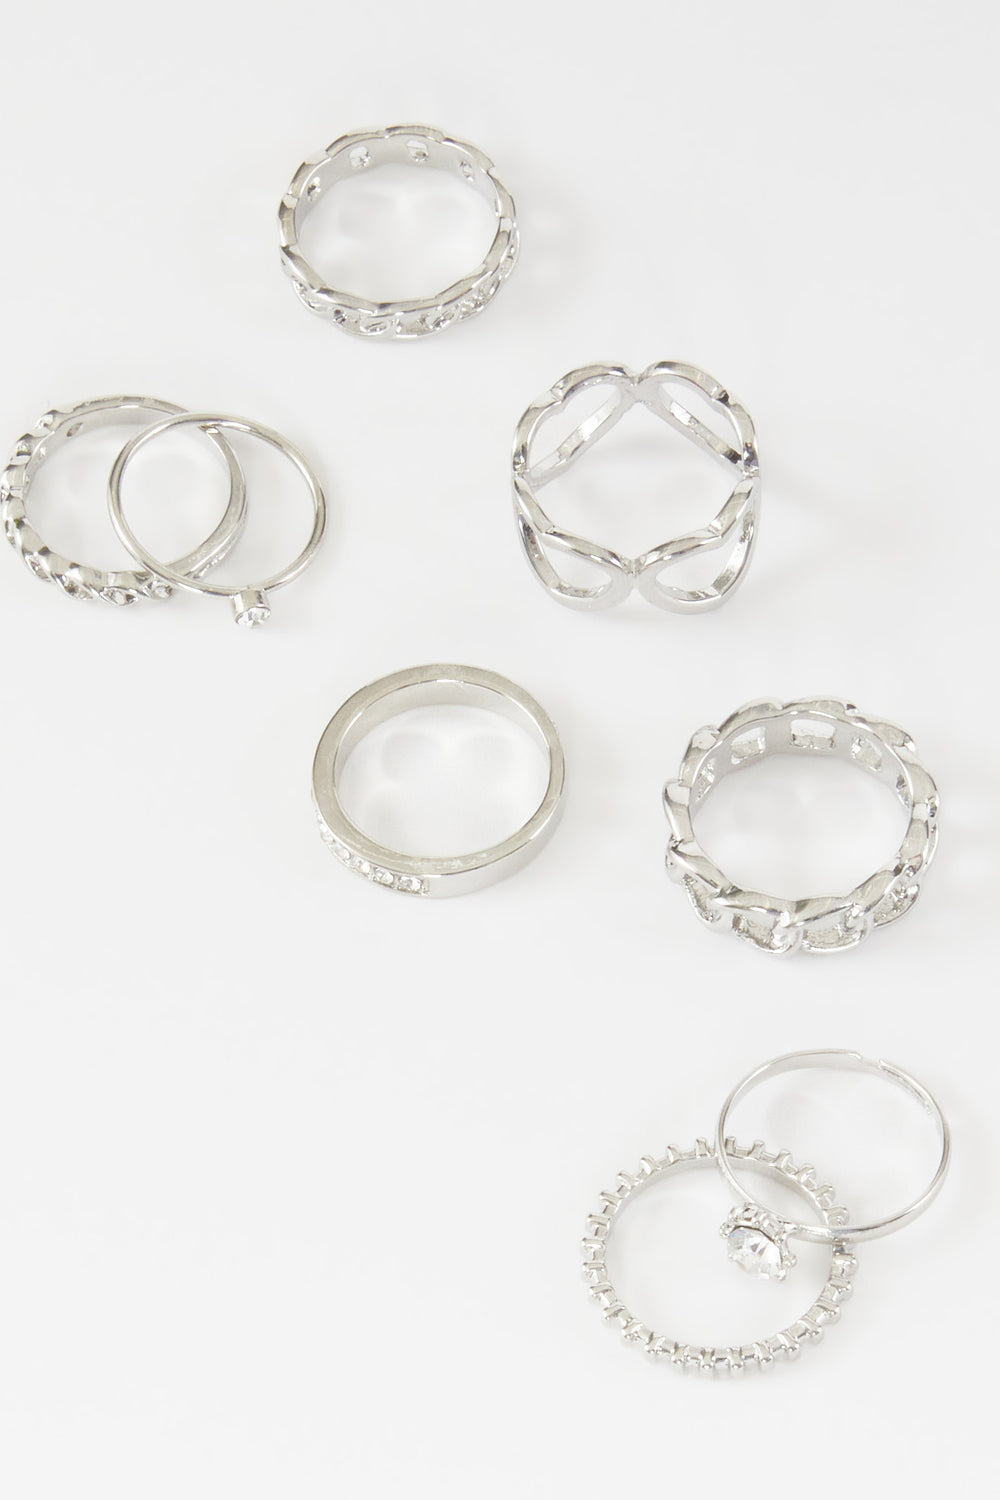 Assorted Faux Gem Rings Set Silver